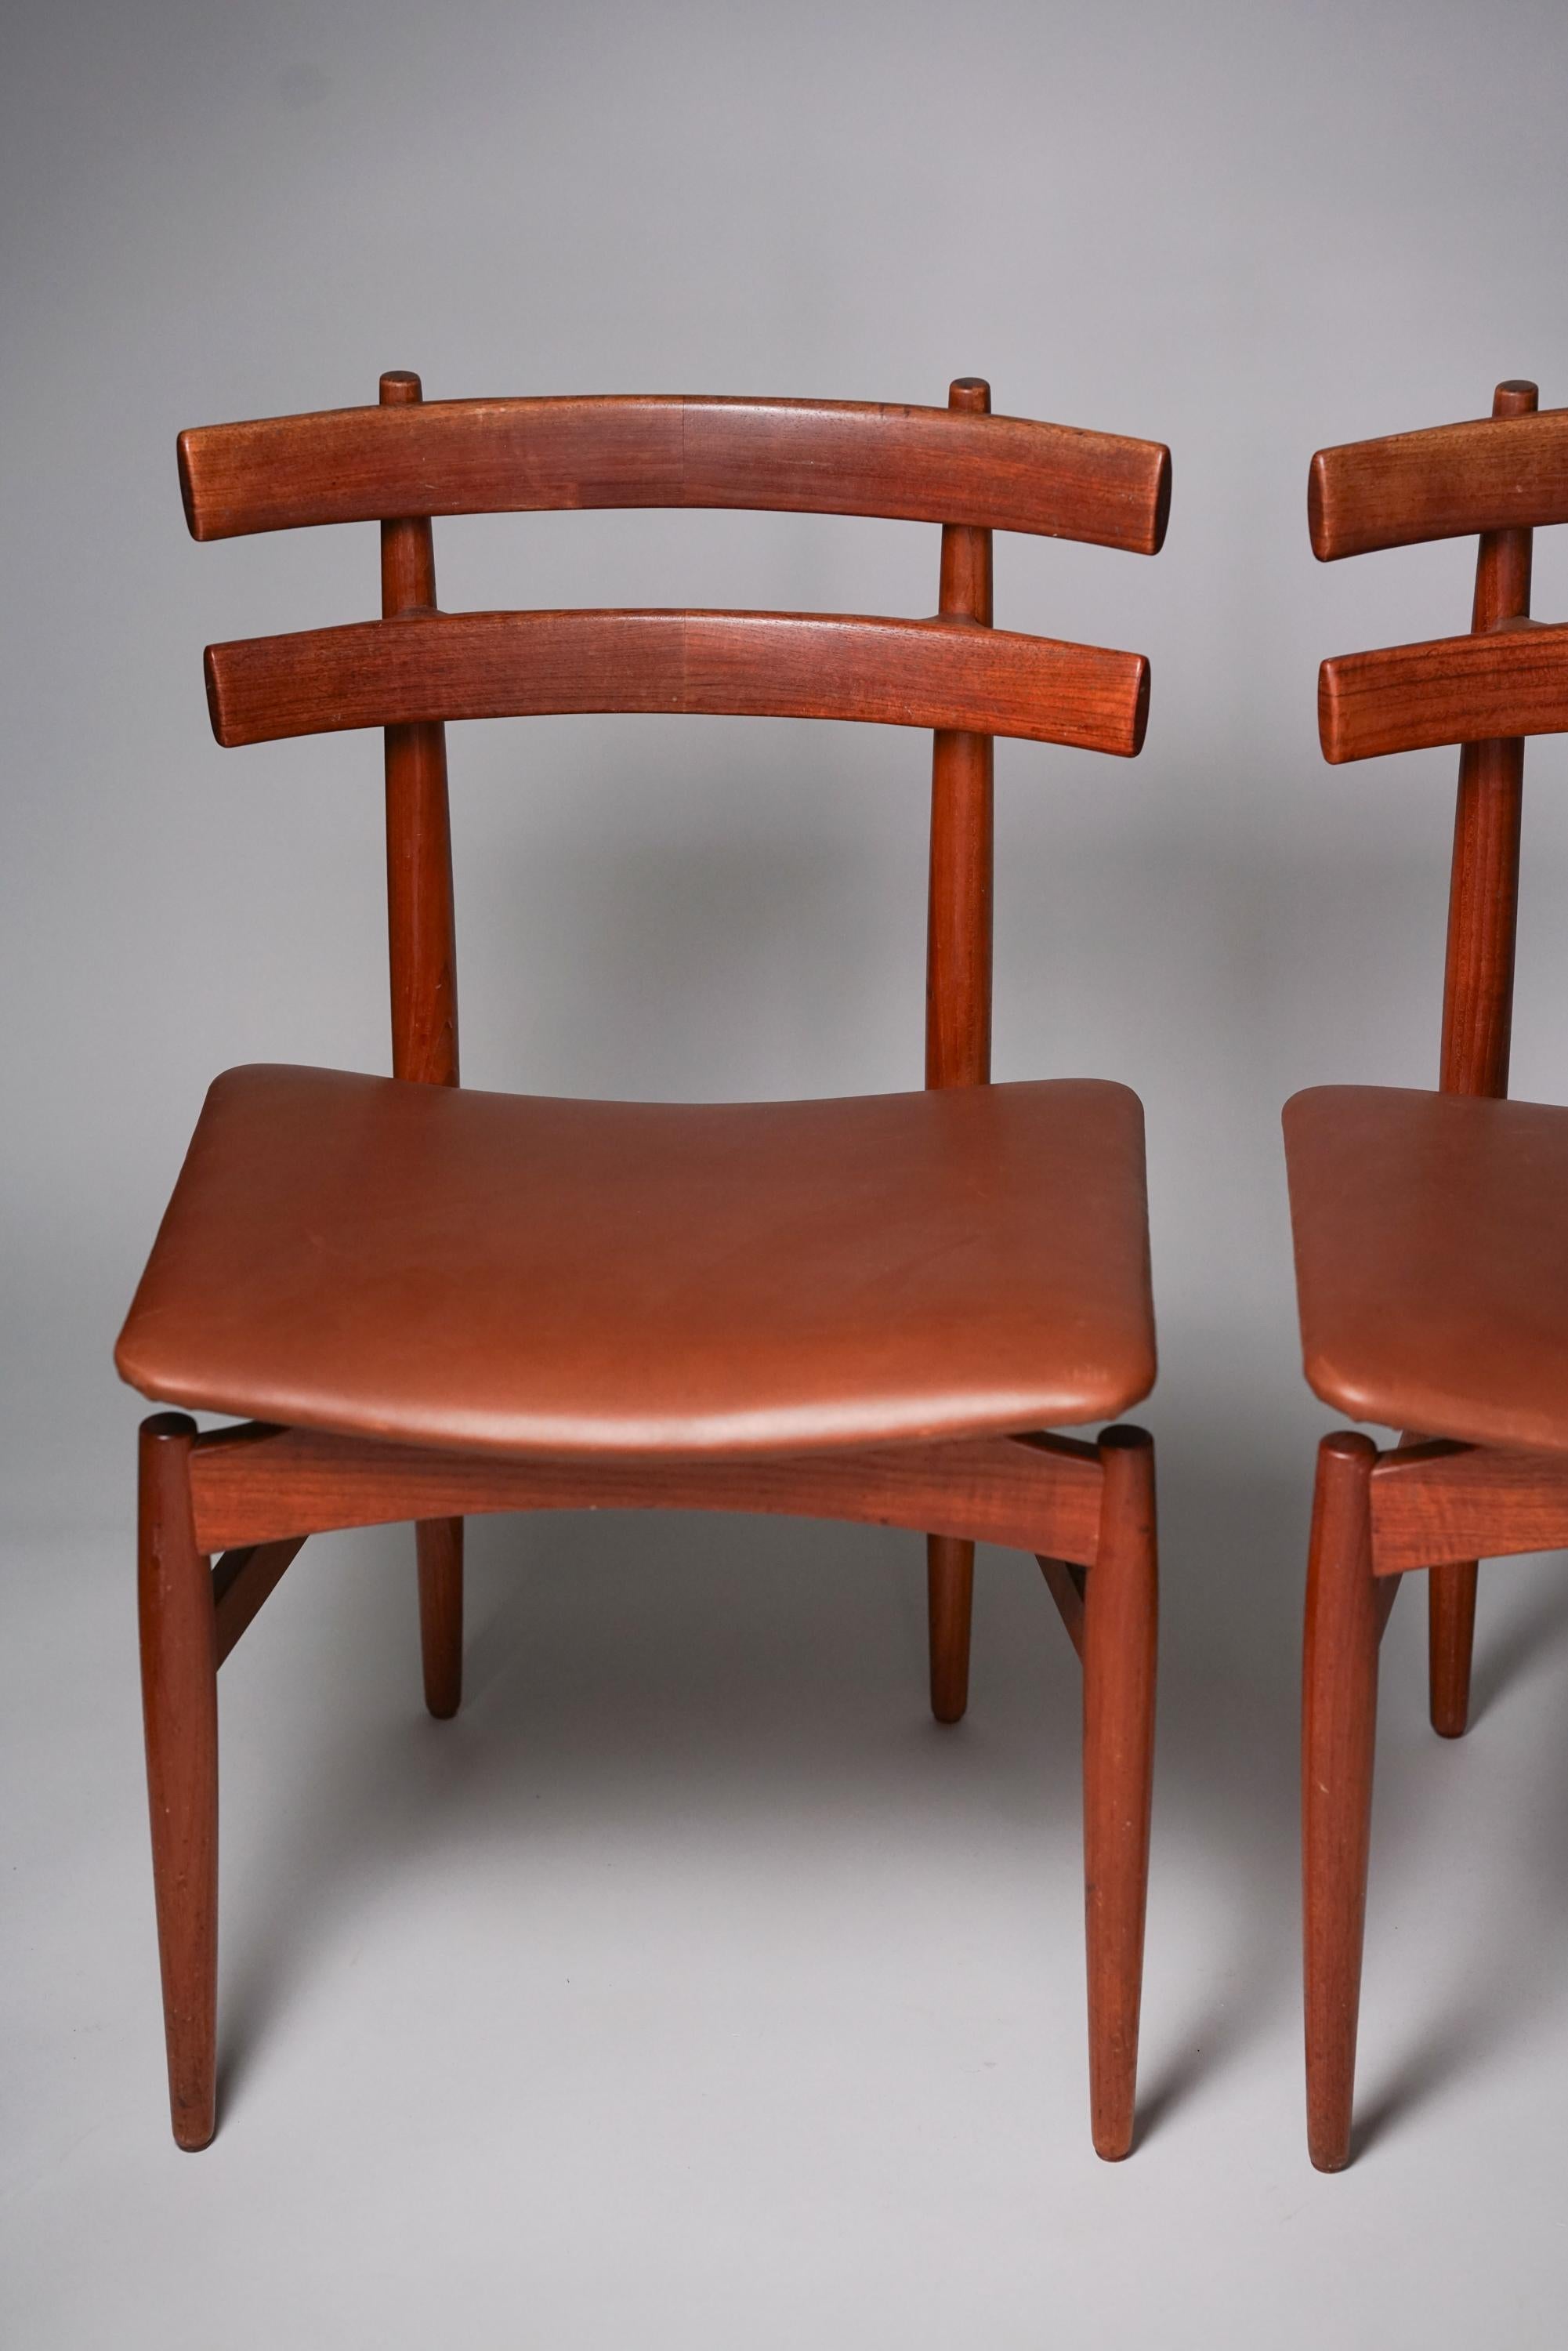 Set of Four Teak Chairs, Poul Hundevad, 1960s In Good Condition For Sale In Helsinki, FI